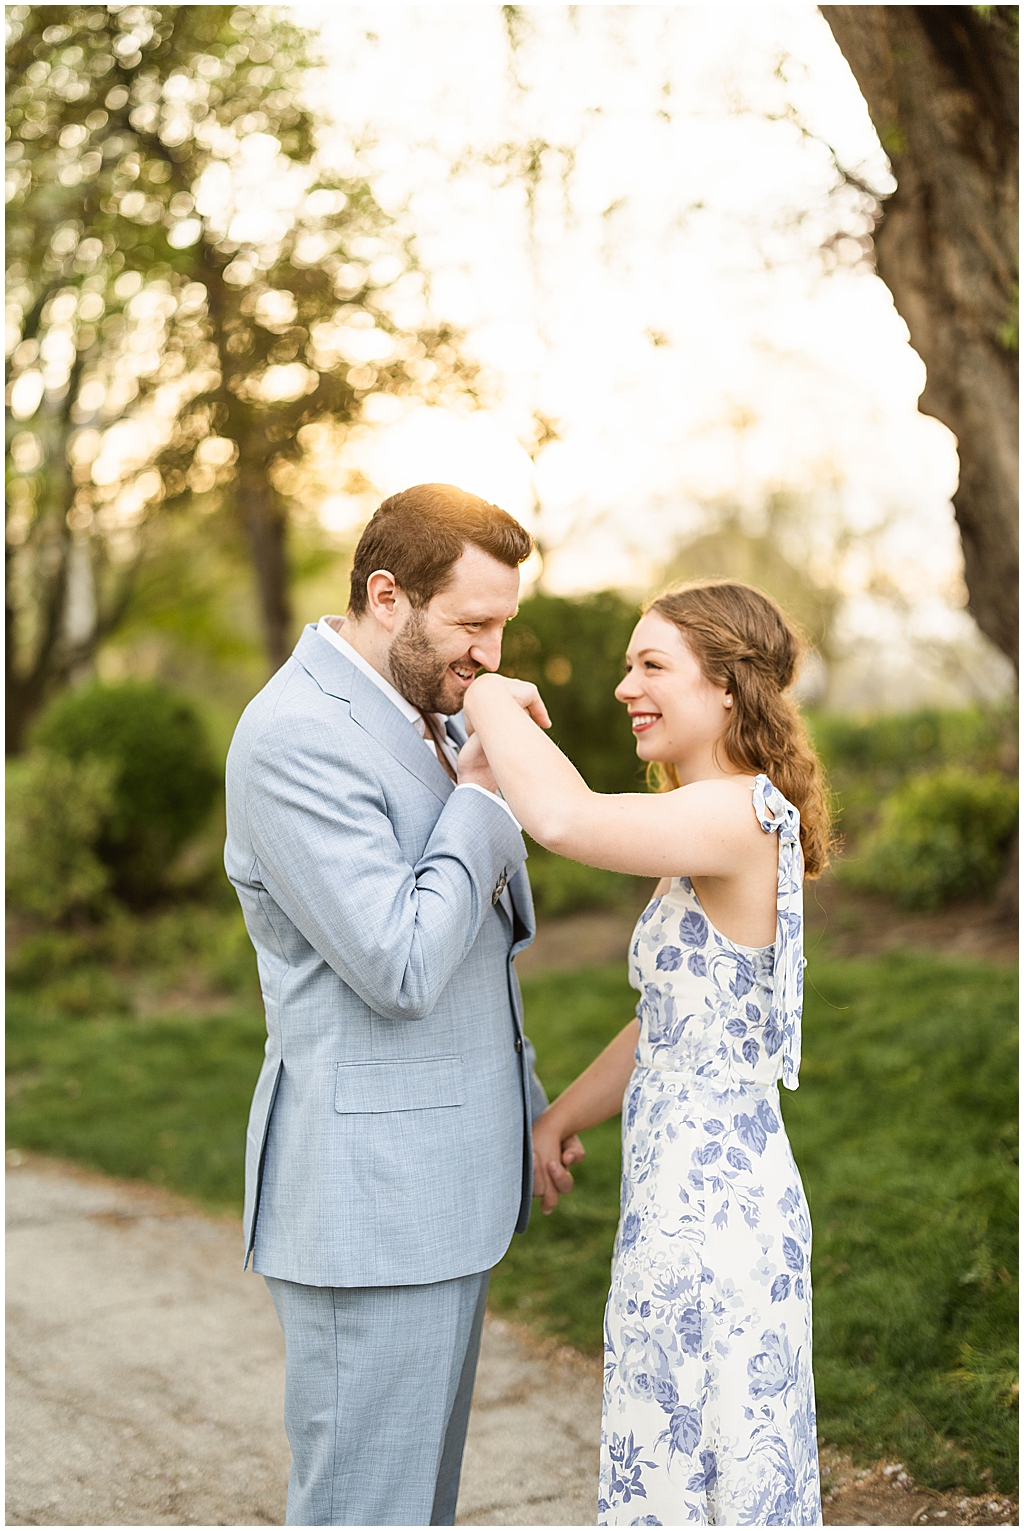 Spring Engagement Session at the Cleveland Museum of art by Wedding Photographer Lindsey Ramdin at L.A.R. Weddings in Ohio.